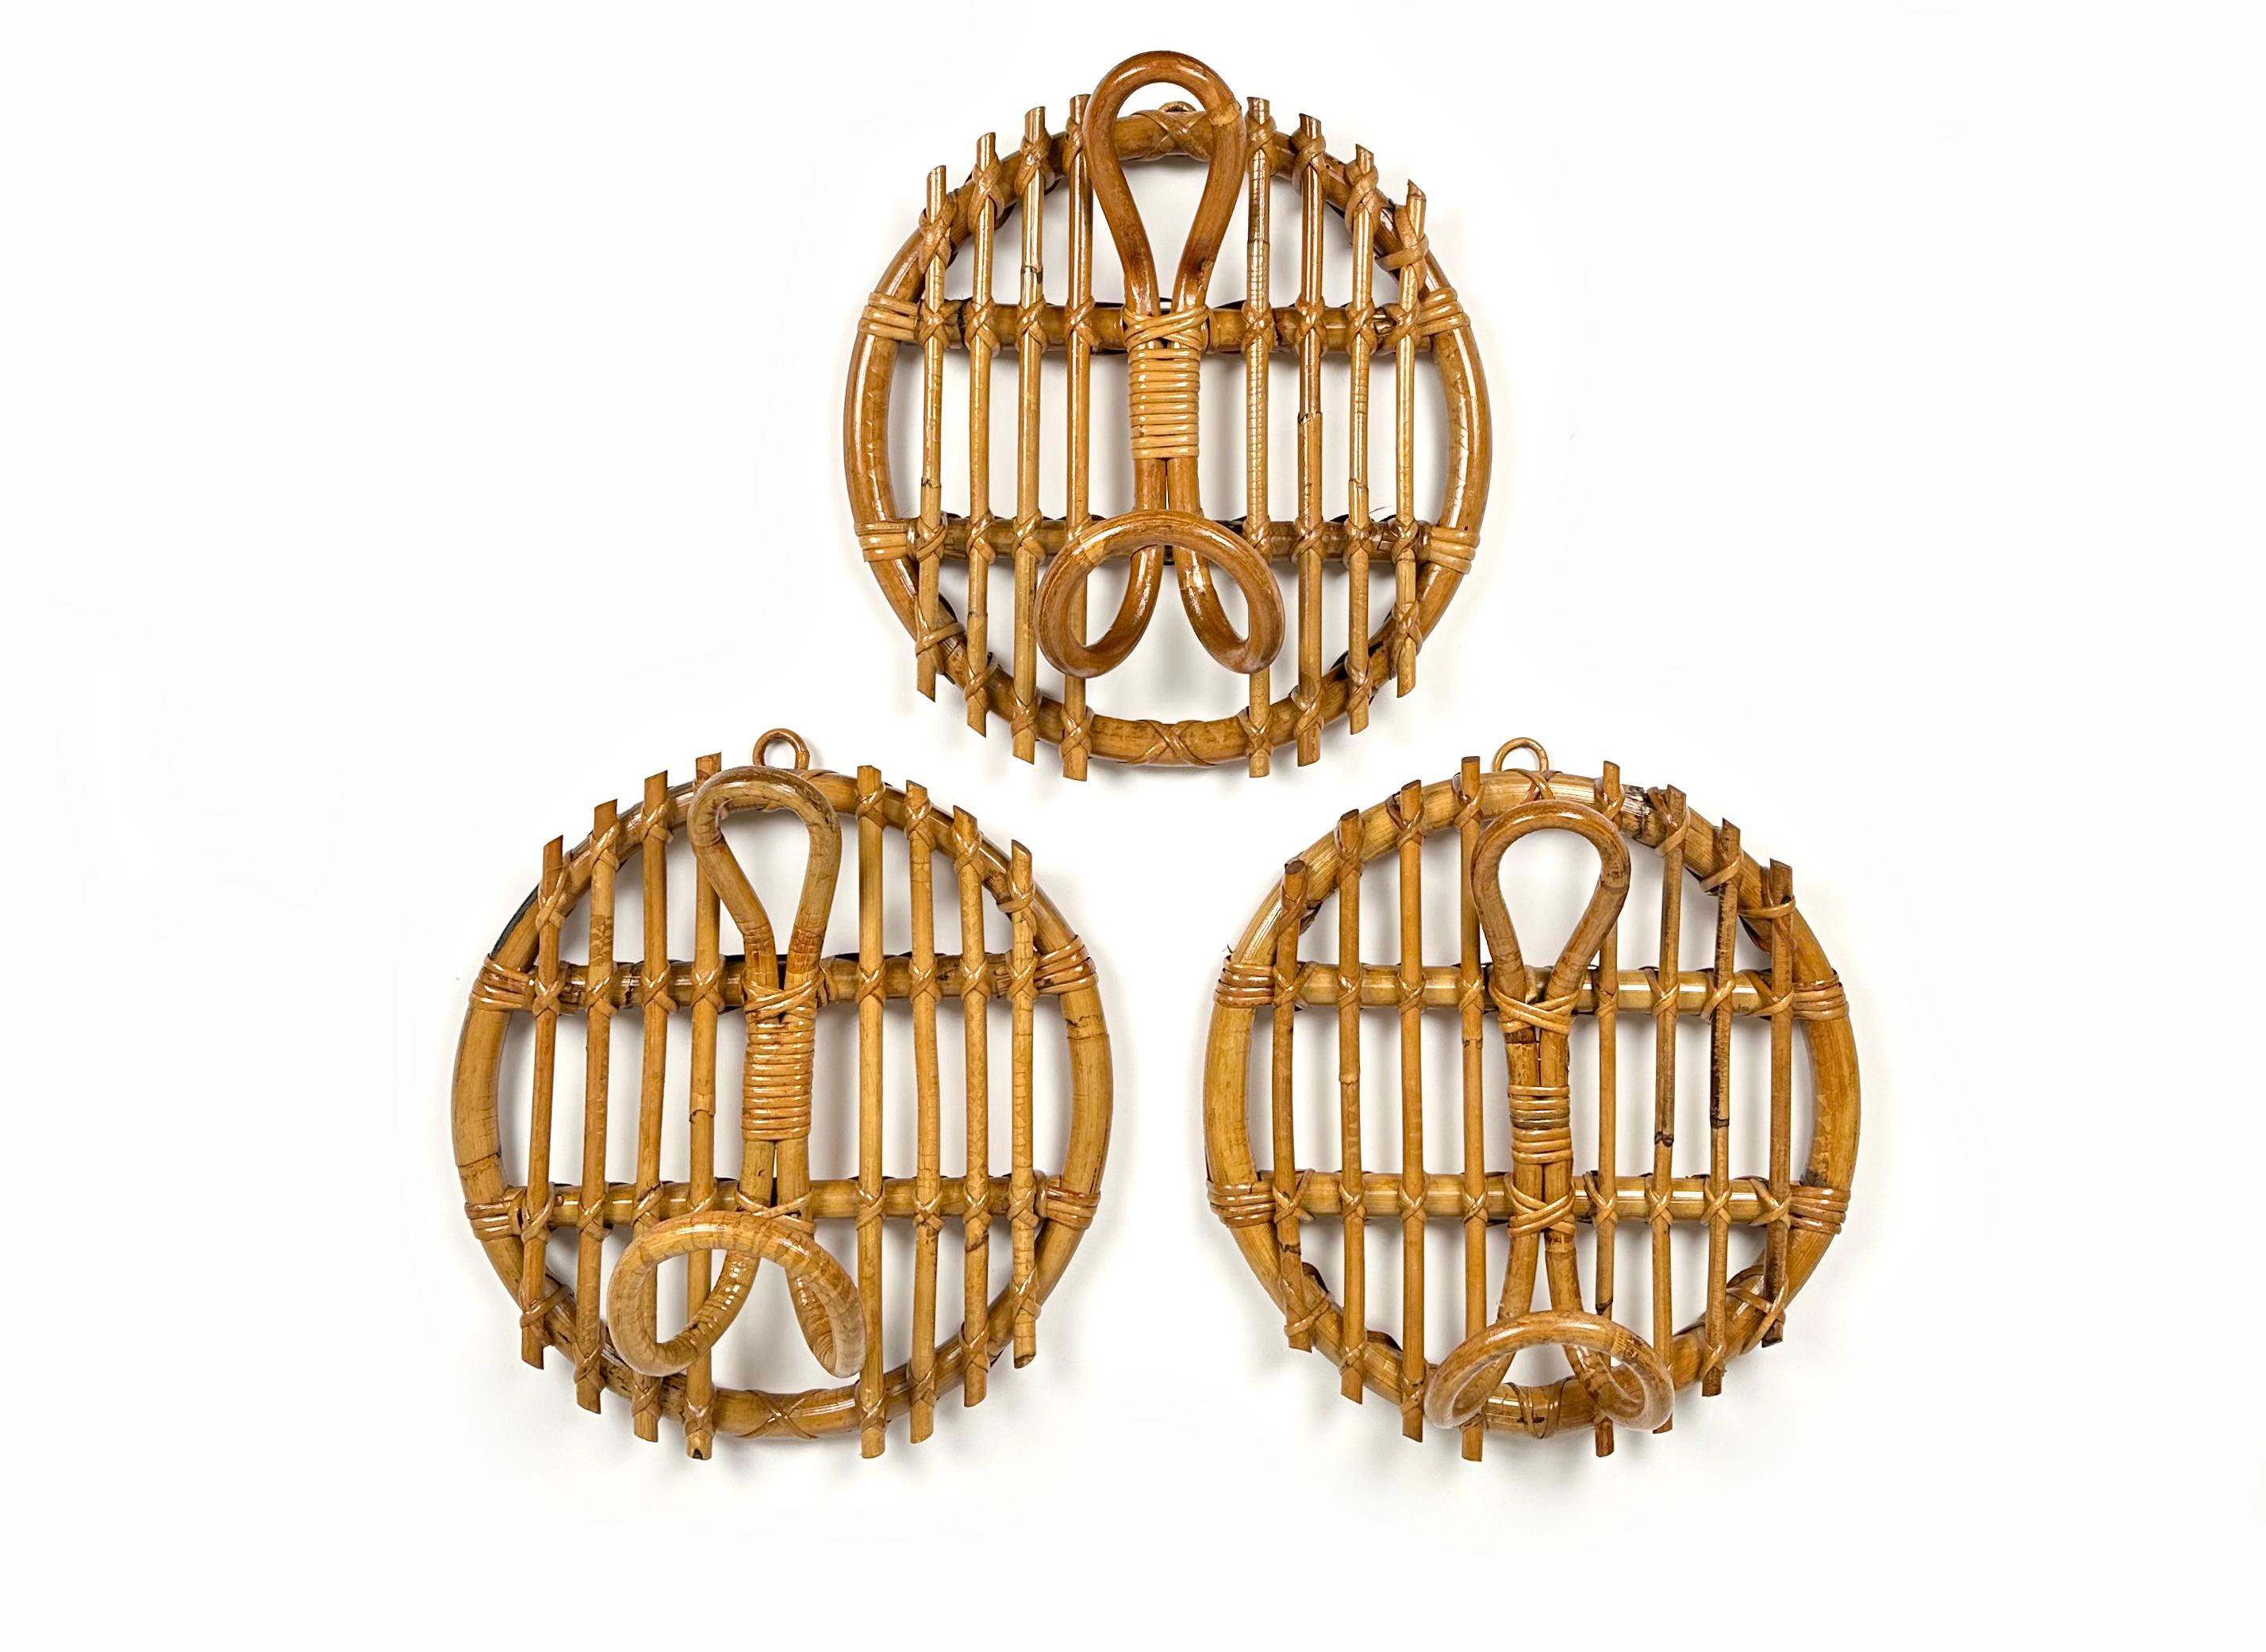 Wonderful midcentury set of three round coat rack double hook in bamboo and rattan in the style of Franco Albini and Franca Helg.

Made in Italy in the 1960s.

Bamboo / rattan has been polished by a professional restorer.